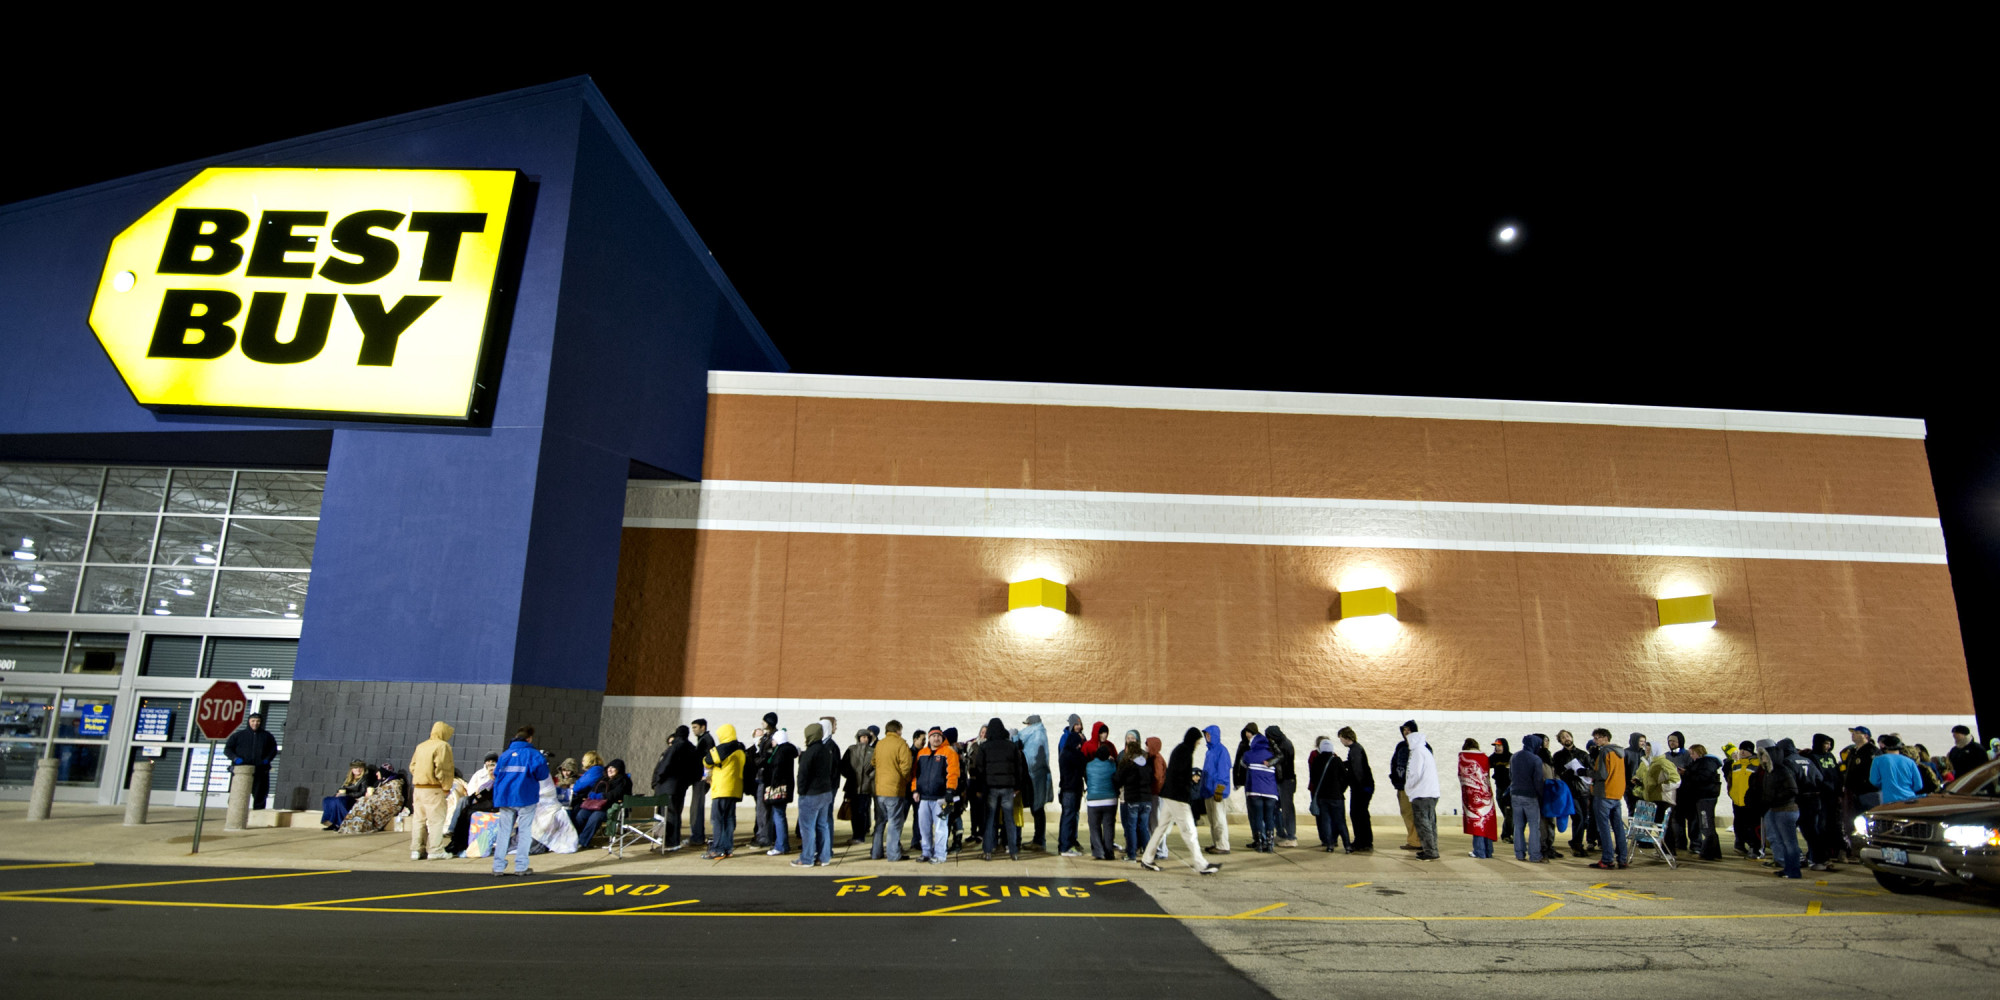 Shoppers wait in line outside a Best Buy Co. store prior to the store&#039;s midnight opening in Peoria, Illinois, U.S., on Thursday, Nov. 22, 2012. Discount store shoppers are prepared to wait in long lines on Black Friday, though they are skeptical about whether they&#039;ll get the best deals of the season. Photographer: Daniel Acker/Bloomberg via Getty Images